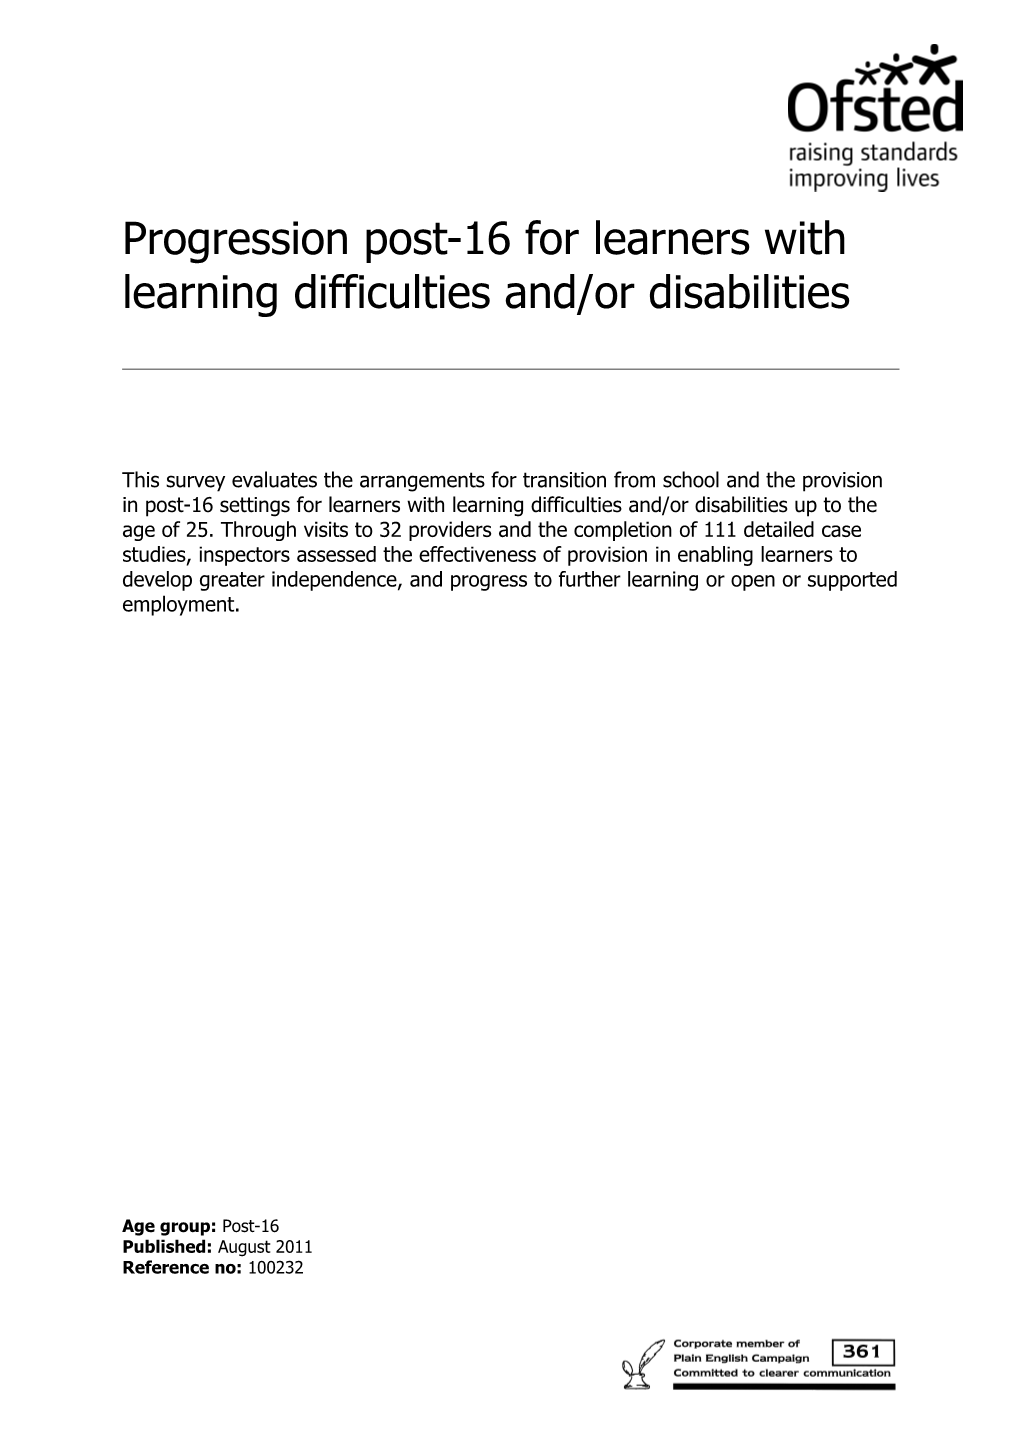 Progression Post-16 for Learners with Learning Difficulties And/Or Disabilities